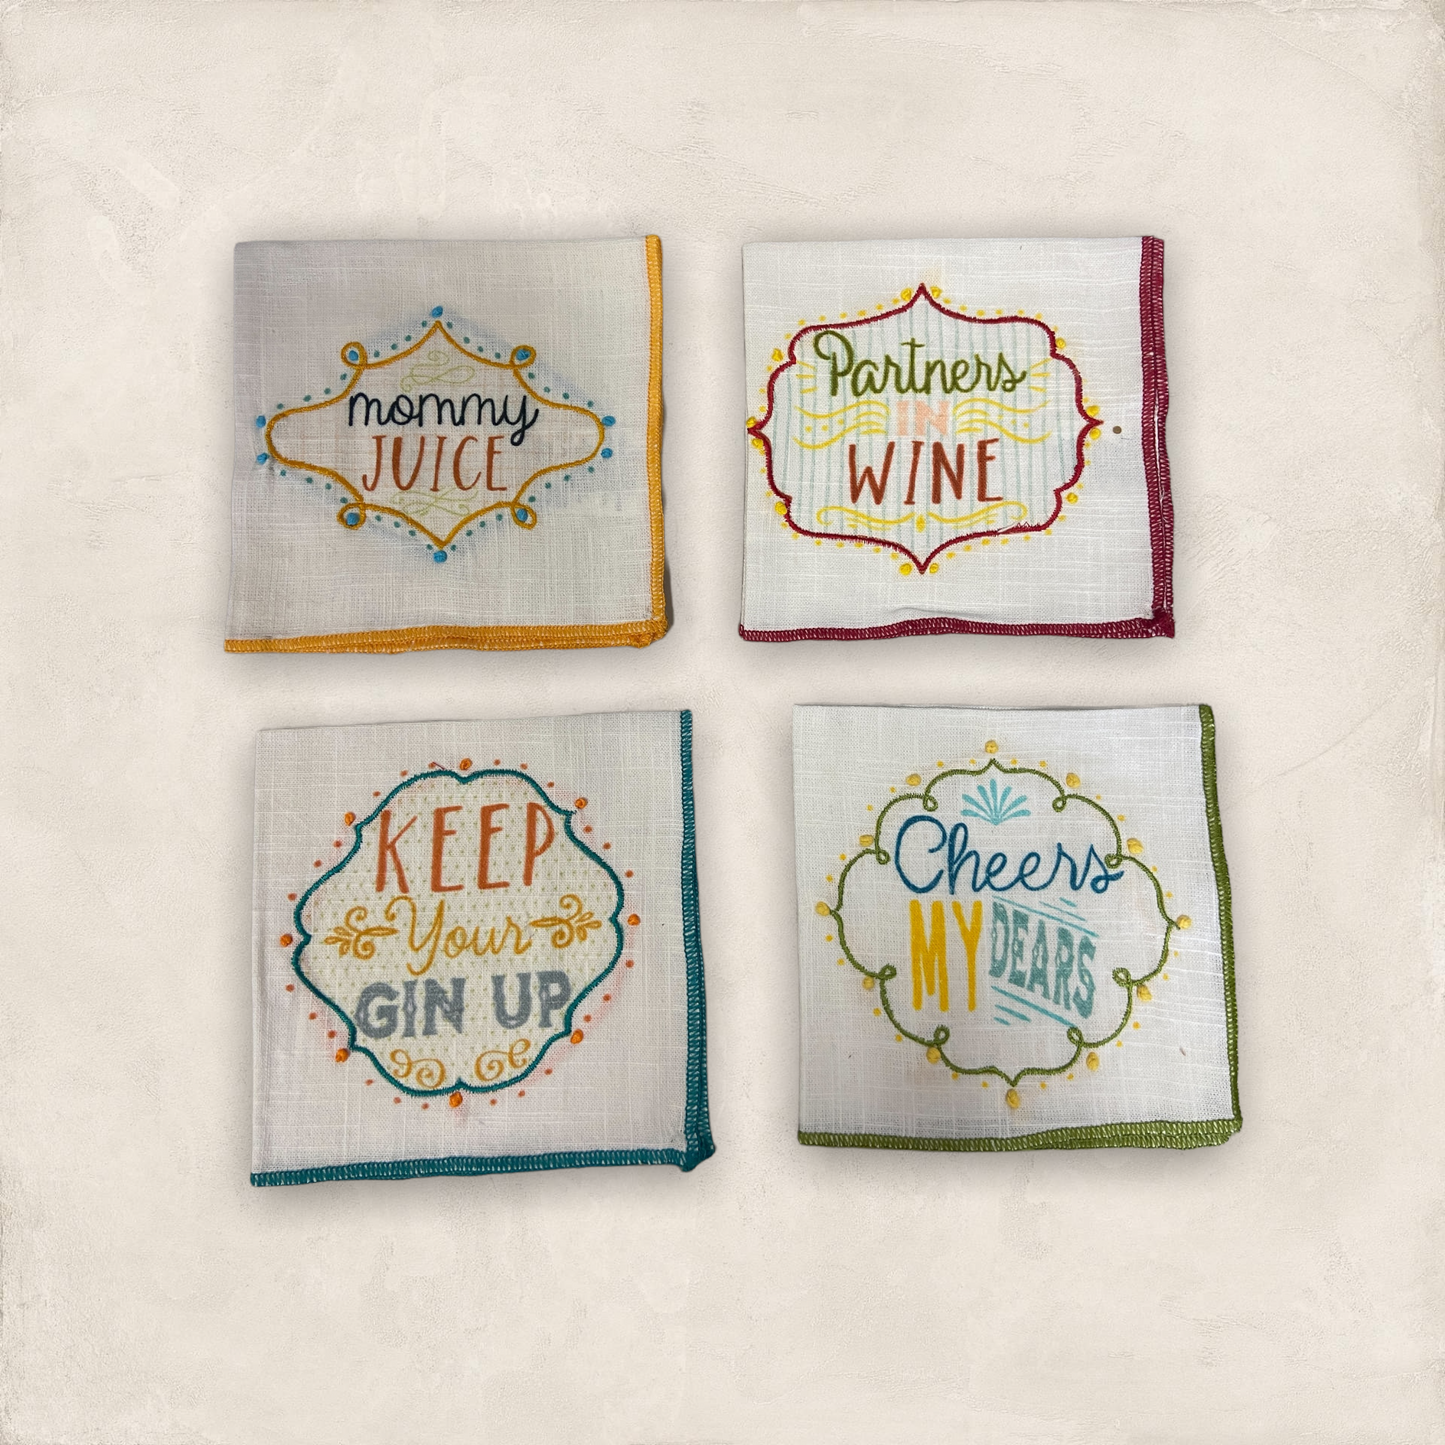 Cotton printed napkins with saying set of four